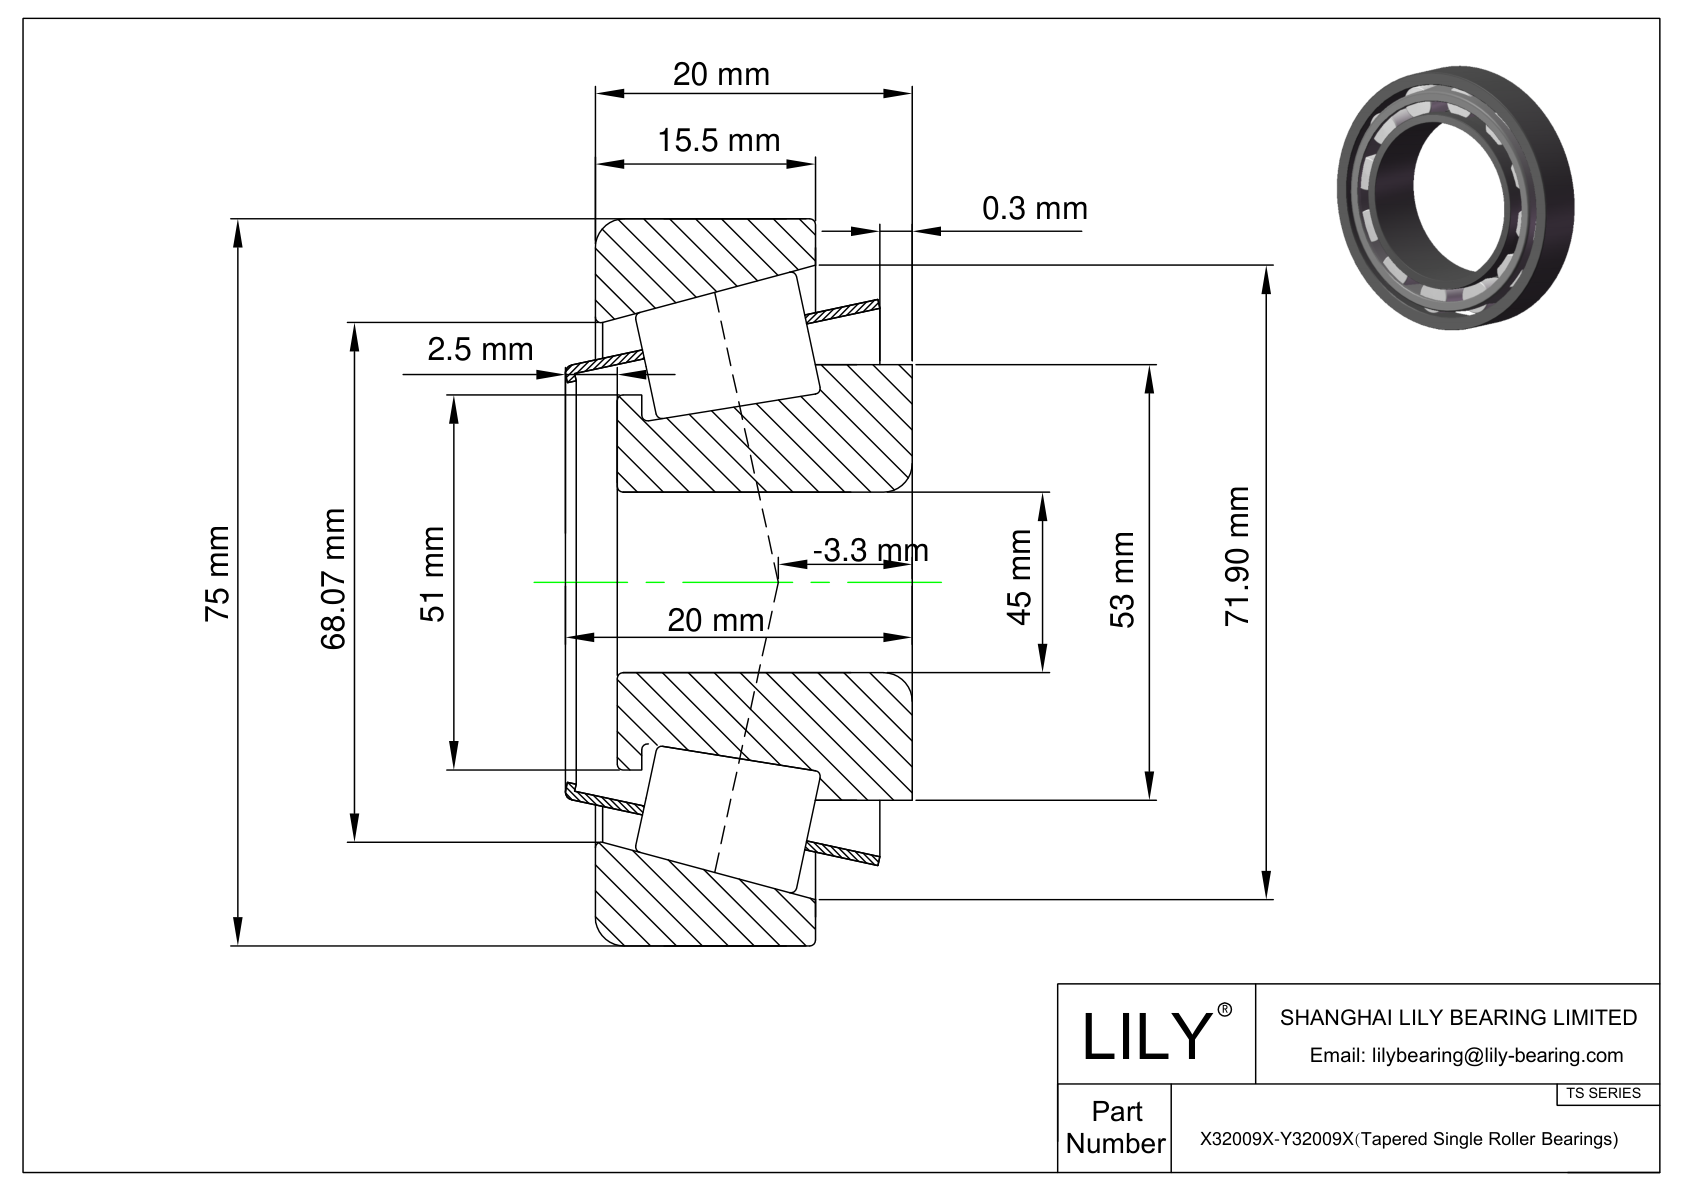 X32009X-Y32009X TS (Tapered Single Roller Bearings) (Metric) cad drawing